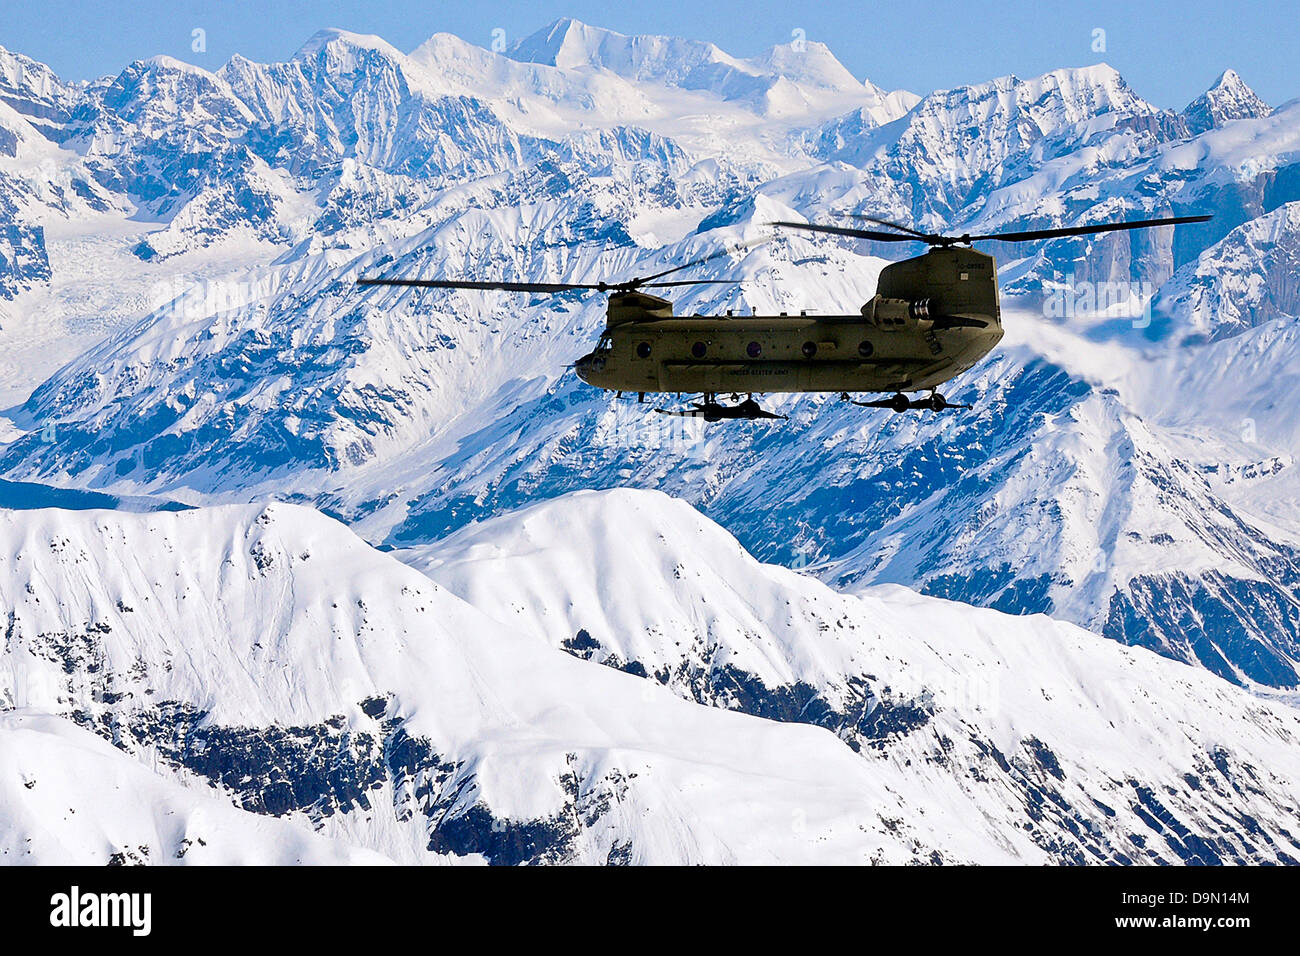 A US Army CH-47 Chinook helicopter flies along the Alaska Range on its way to Kahiltna Glacier May 20, 2013. A team of eight soldiers and one Army civilian from Fort Wainwright were transported to the National Park Service base camp on the glacier to begin their attempt to climb Mount McKinley, North America's tallest peak. Stock Photo